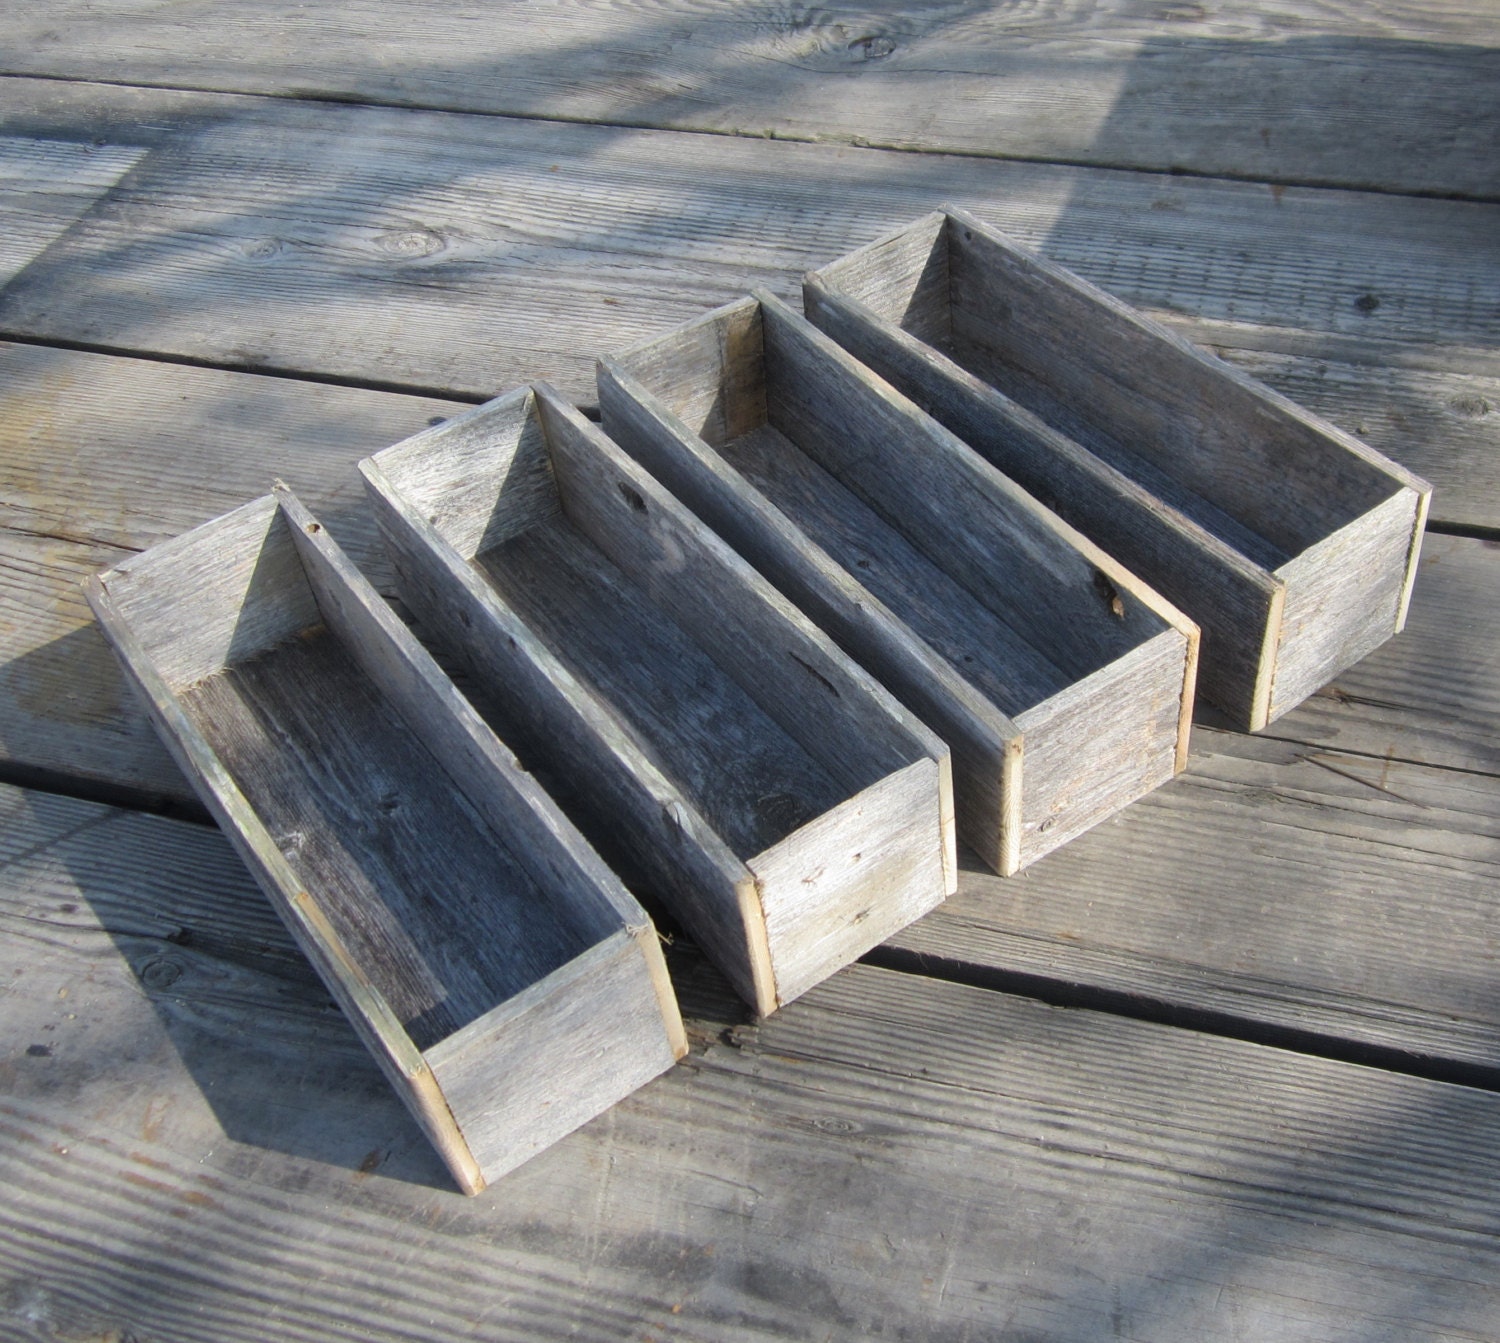 4 Rustic Wedding Centerpiece Boxes - Use As Planters After Event - Wedding Decor